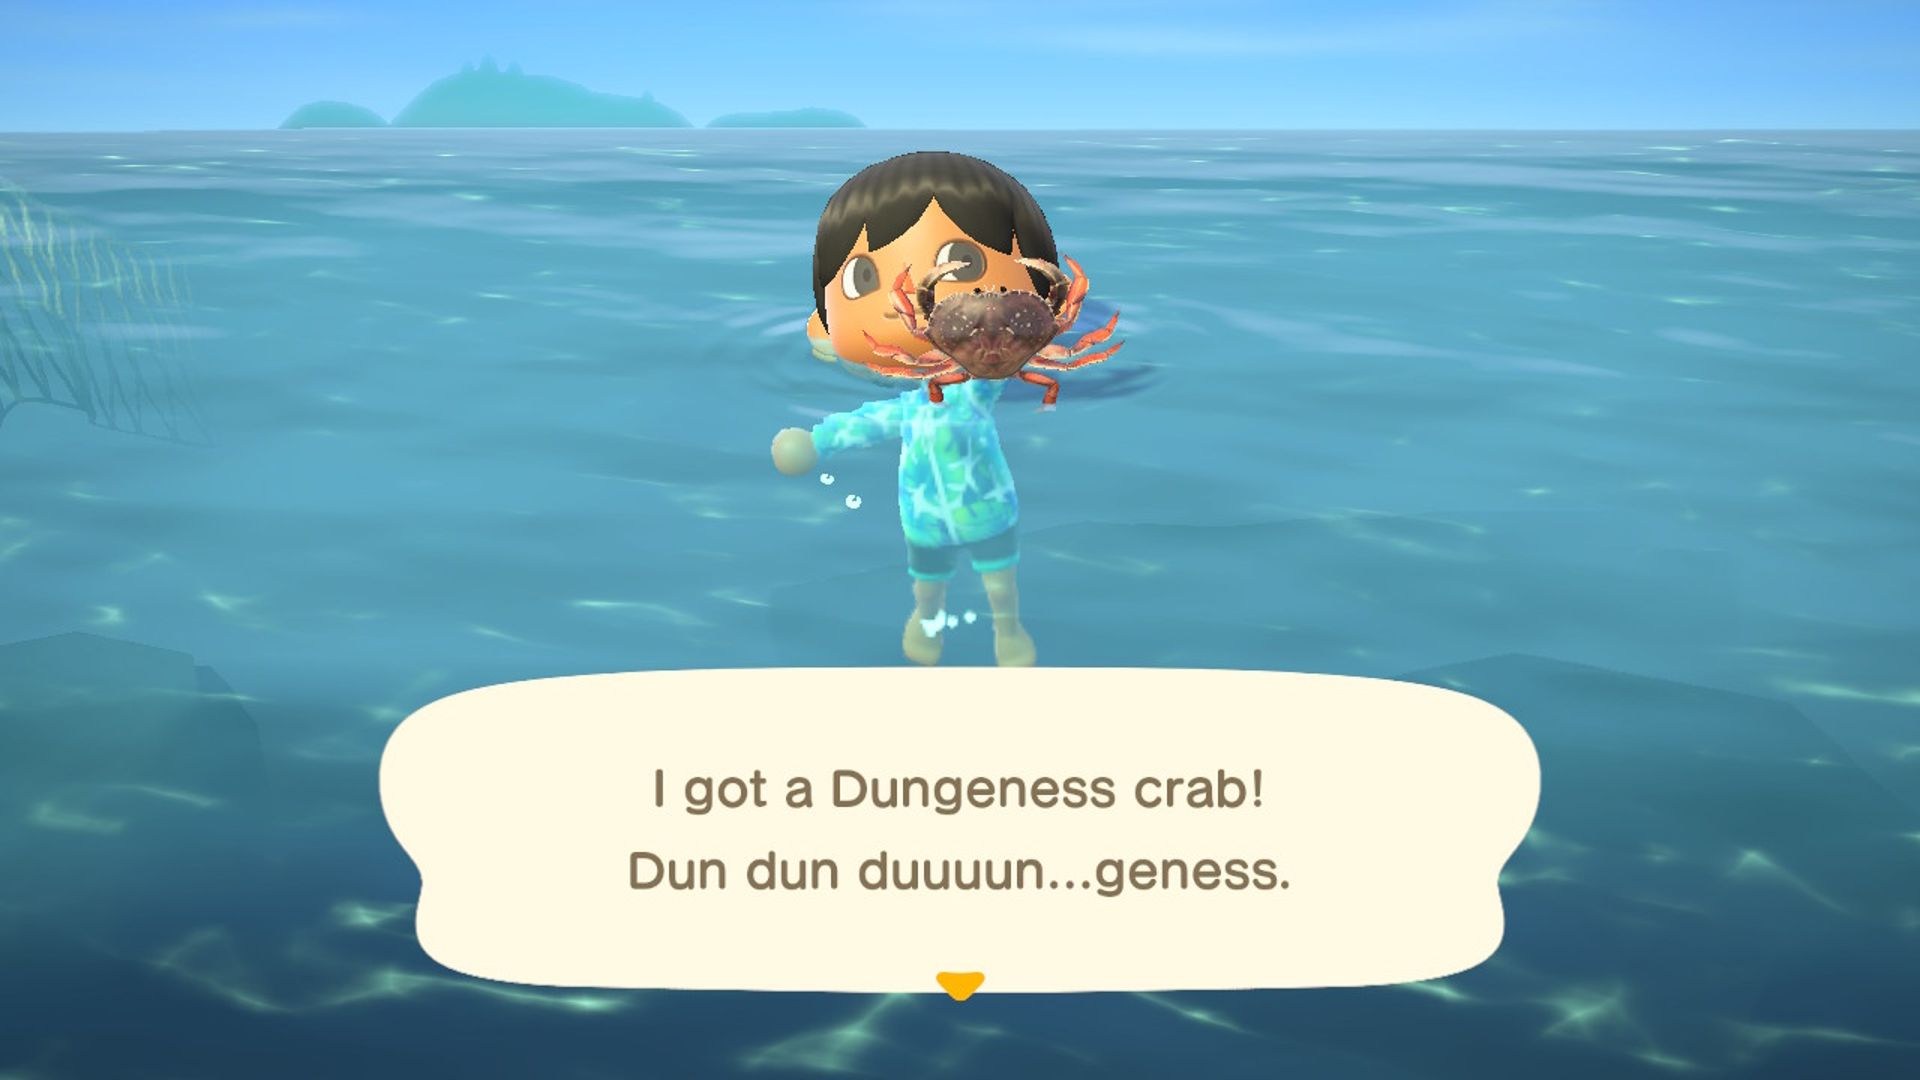 An Animal Crossing New Horizons player shows off a crab while swimming in the ocean